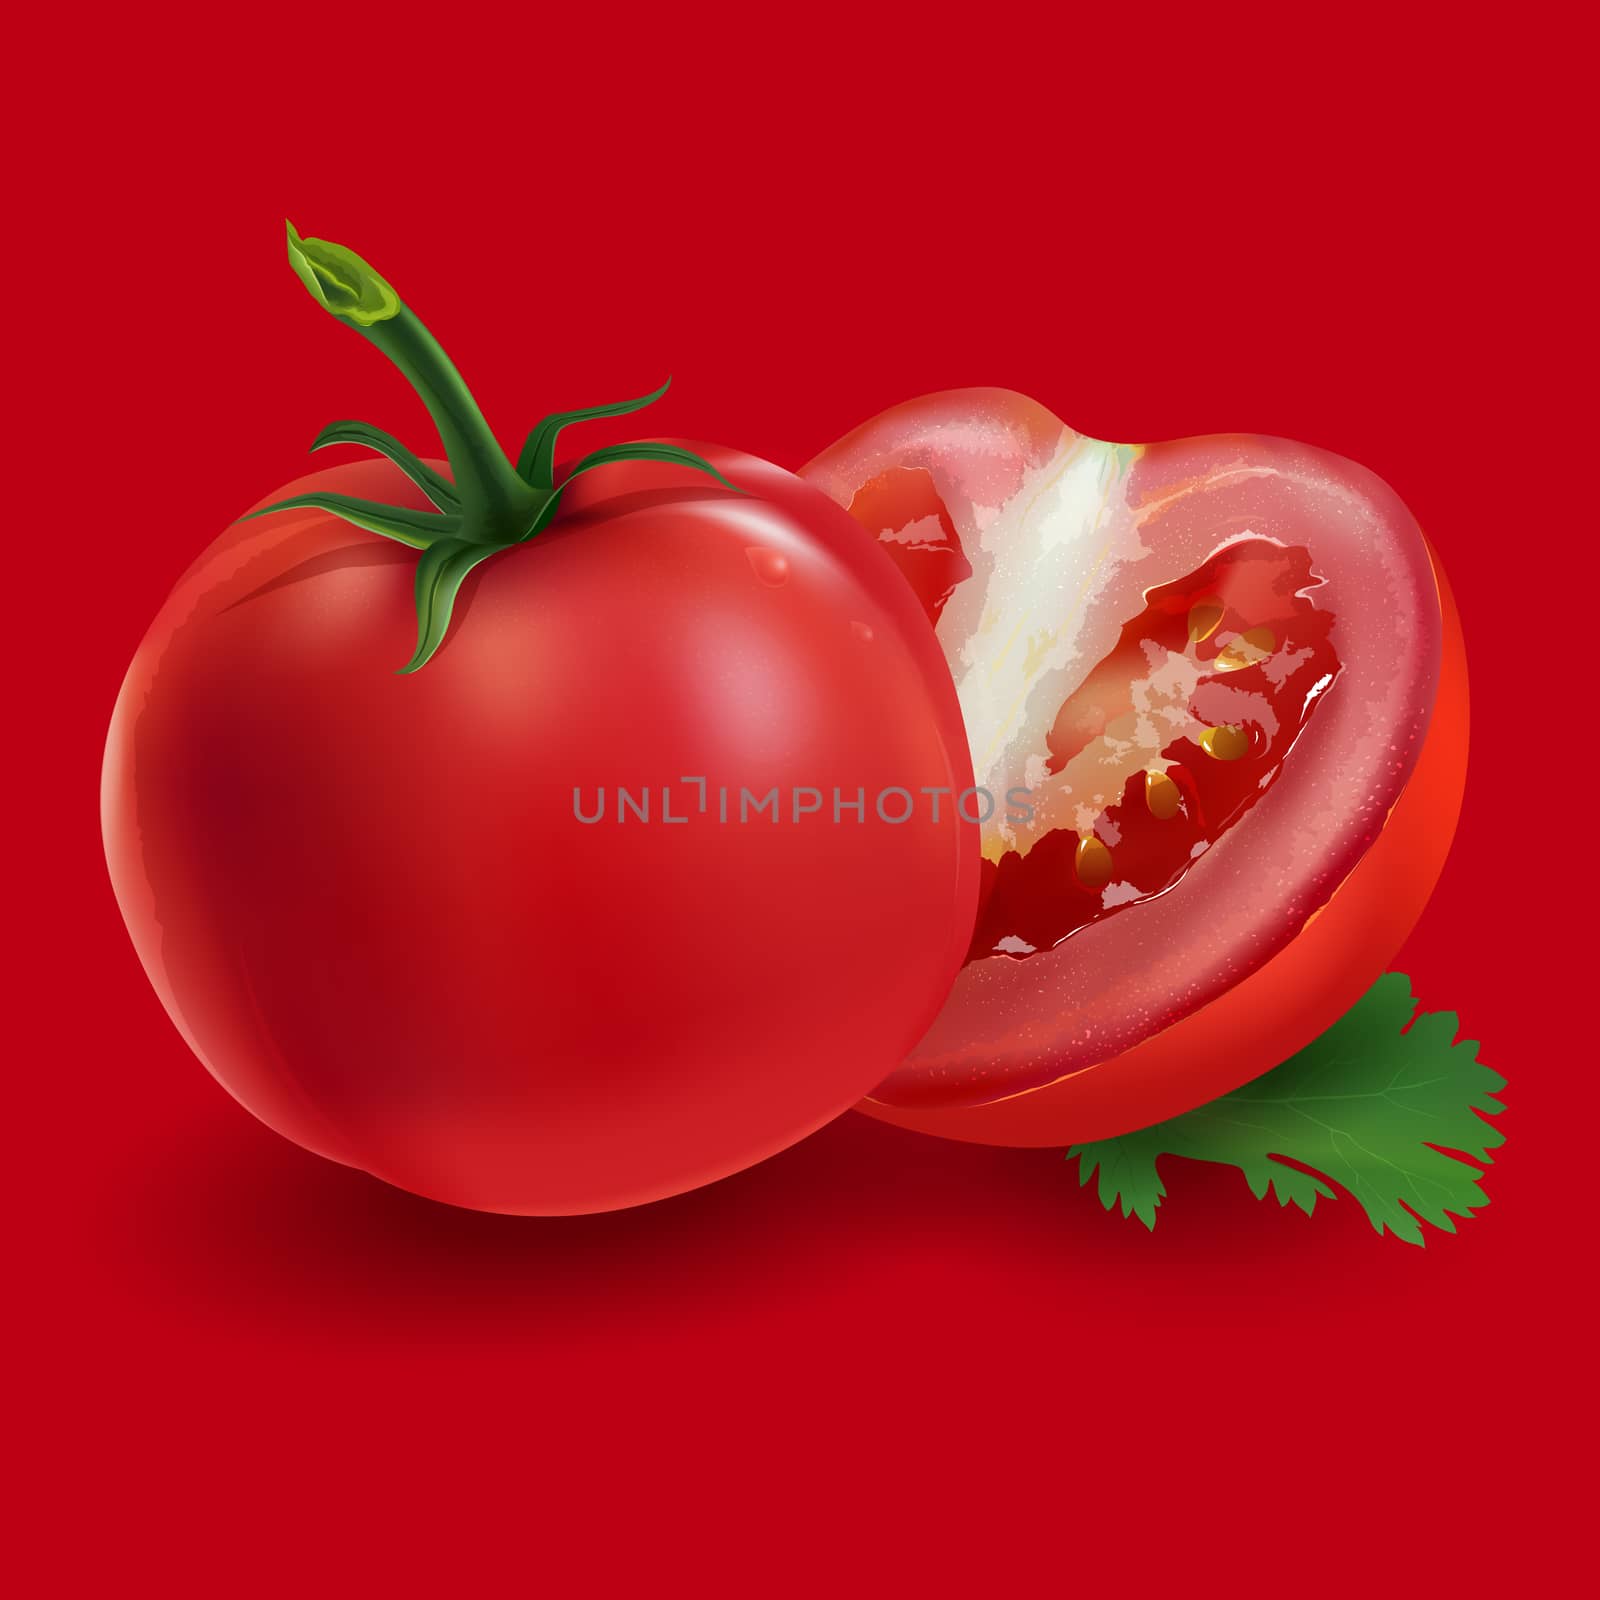 Tomatoes on a red background by ConceptCafe